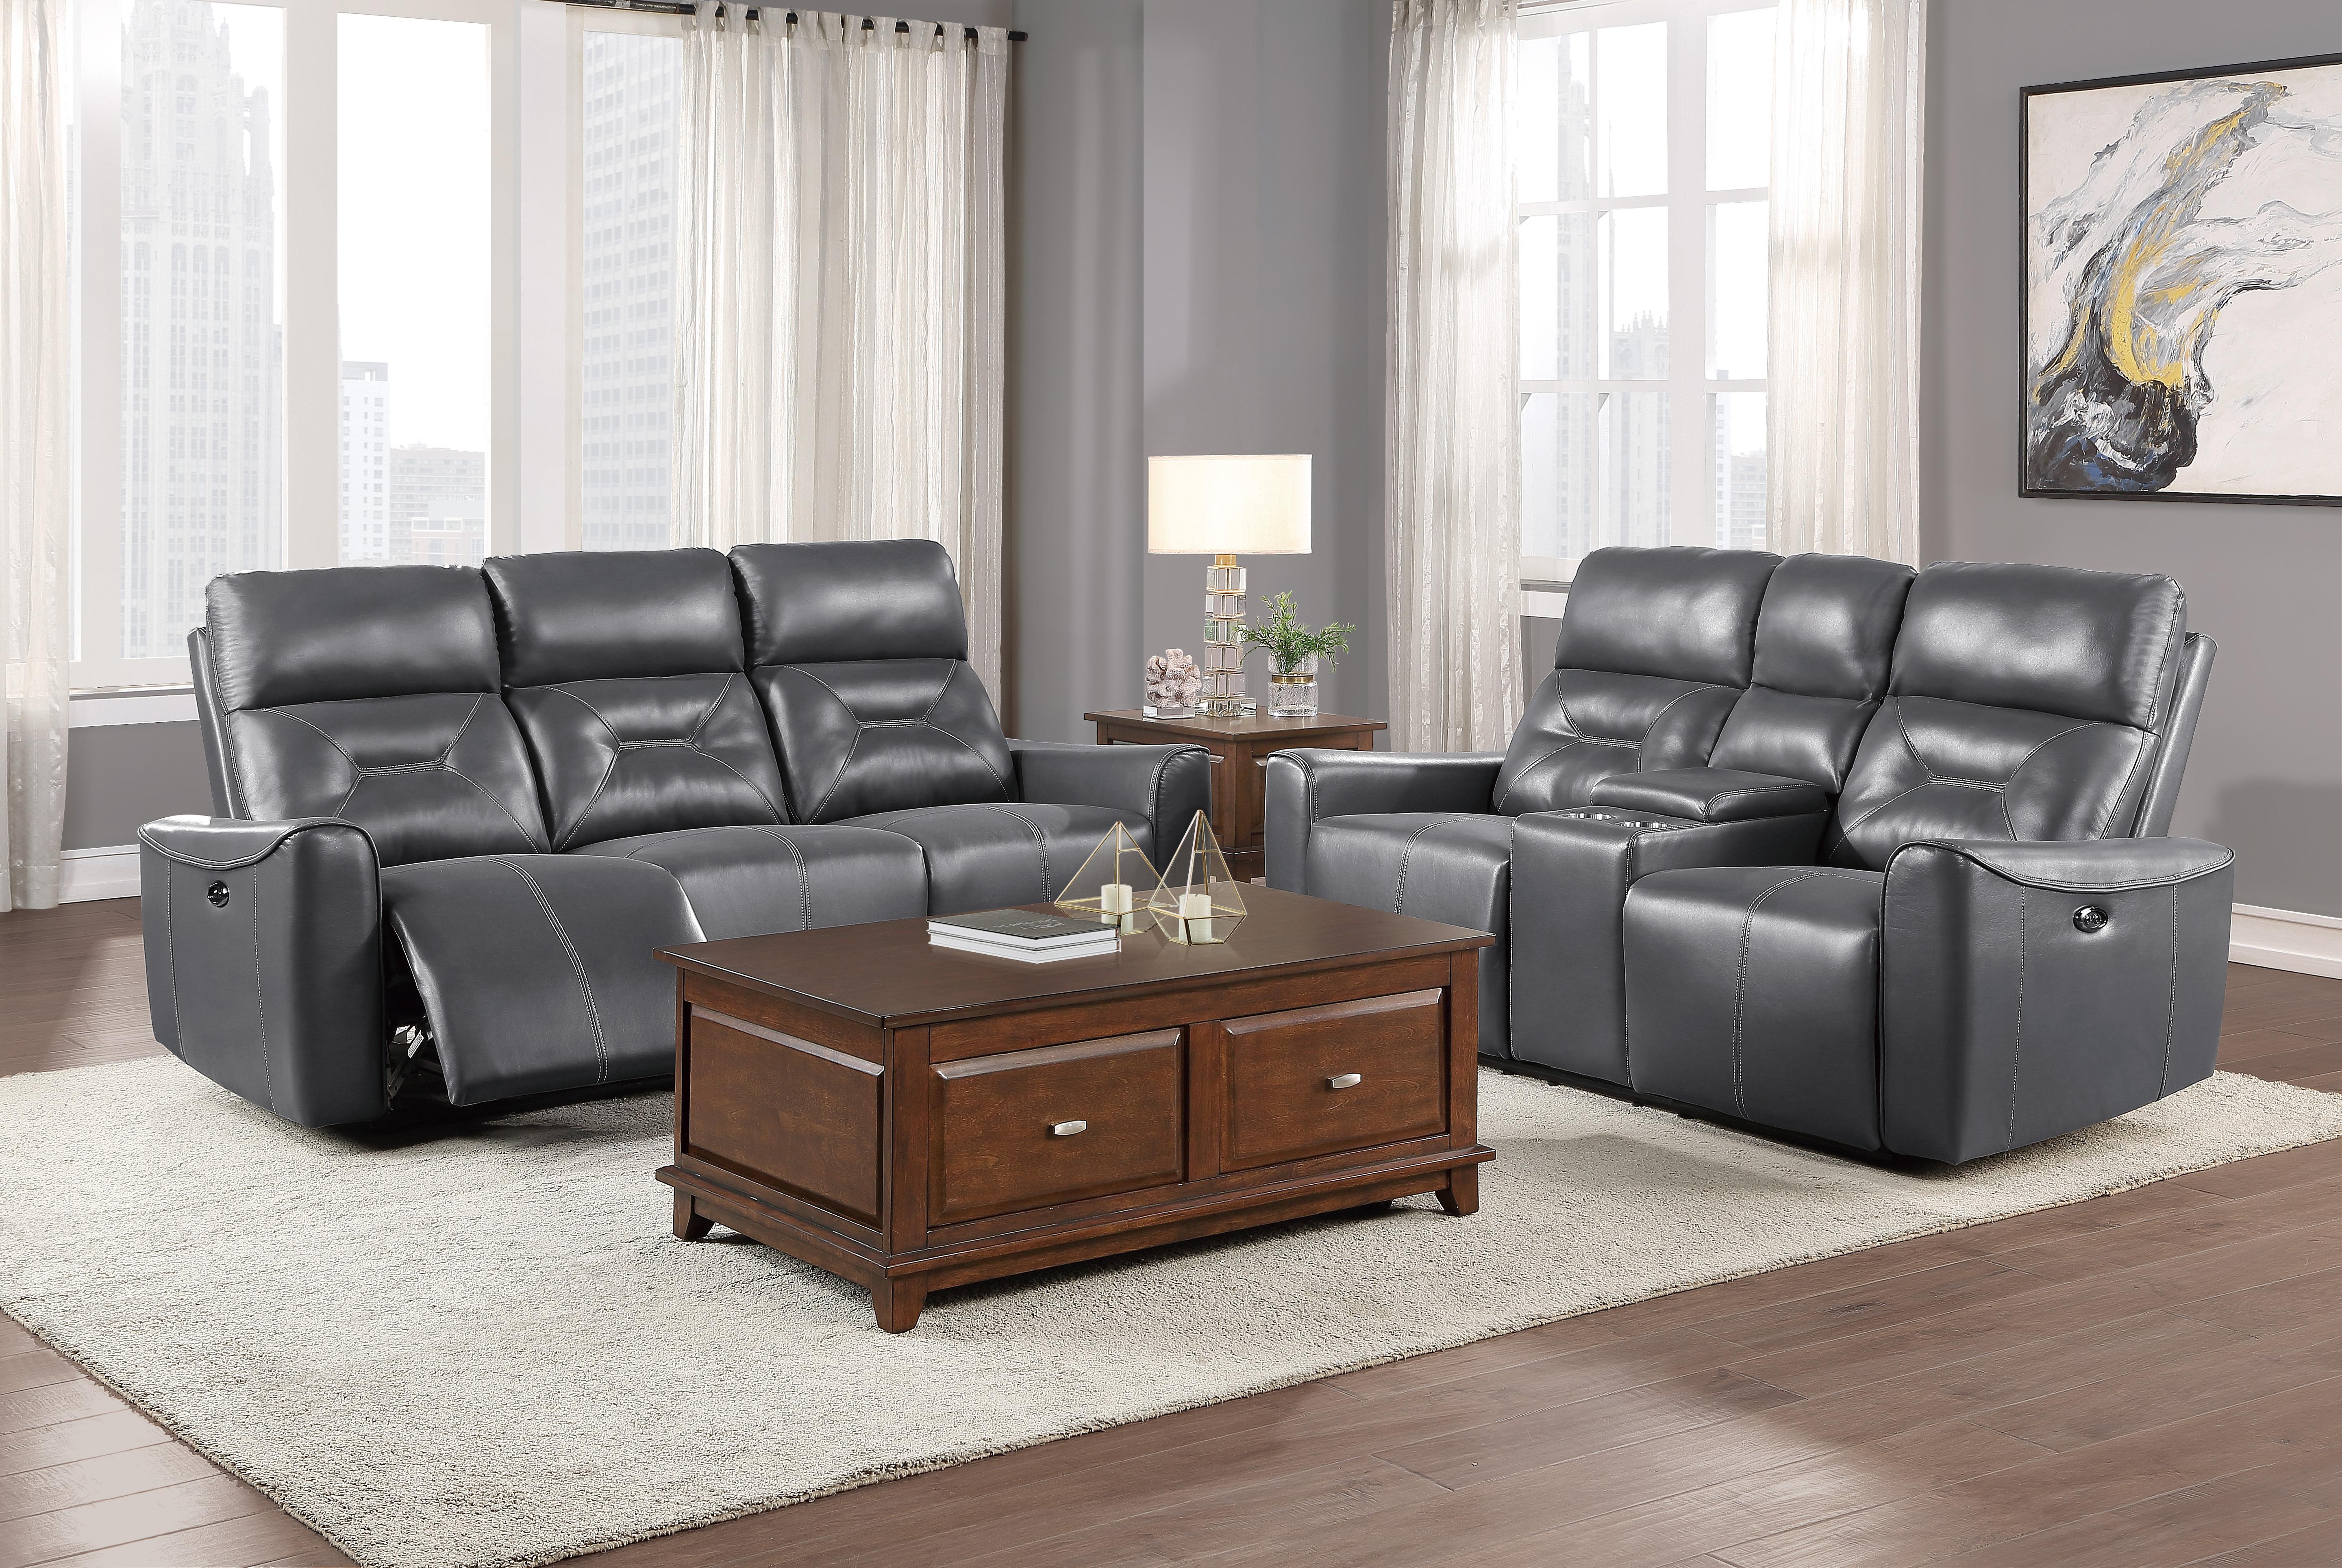 Modern Power Reclining Set 9446GY-PW-2PC Burwell 9446GY-PW-2PC in Dark Gray Faux Leather